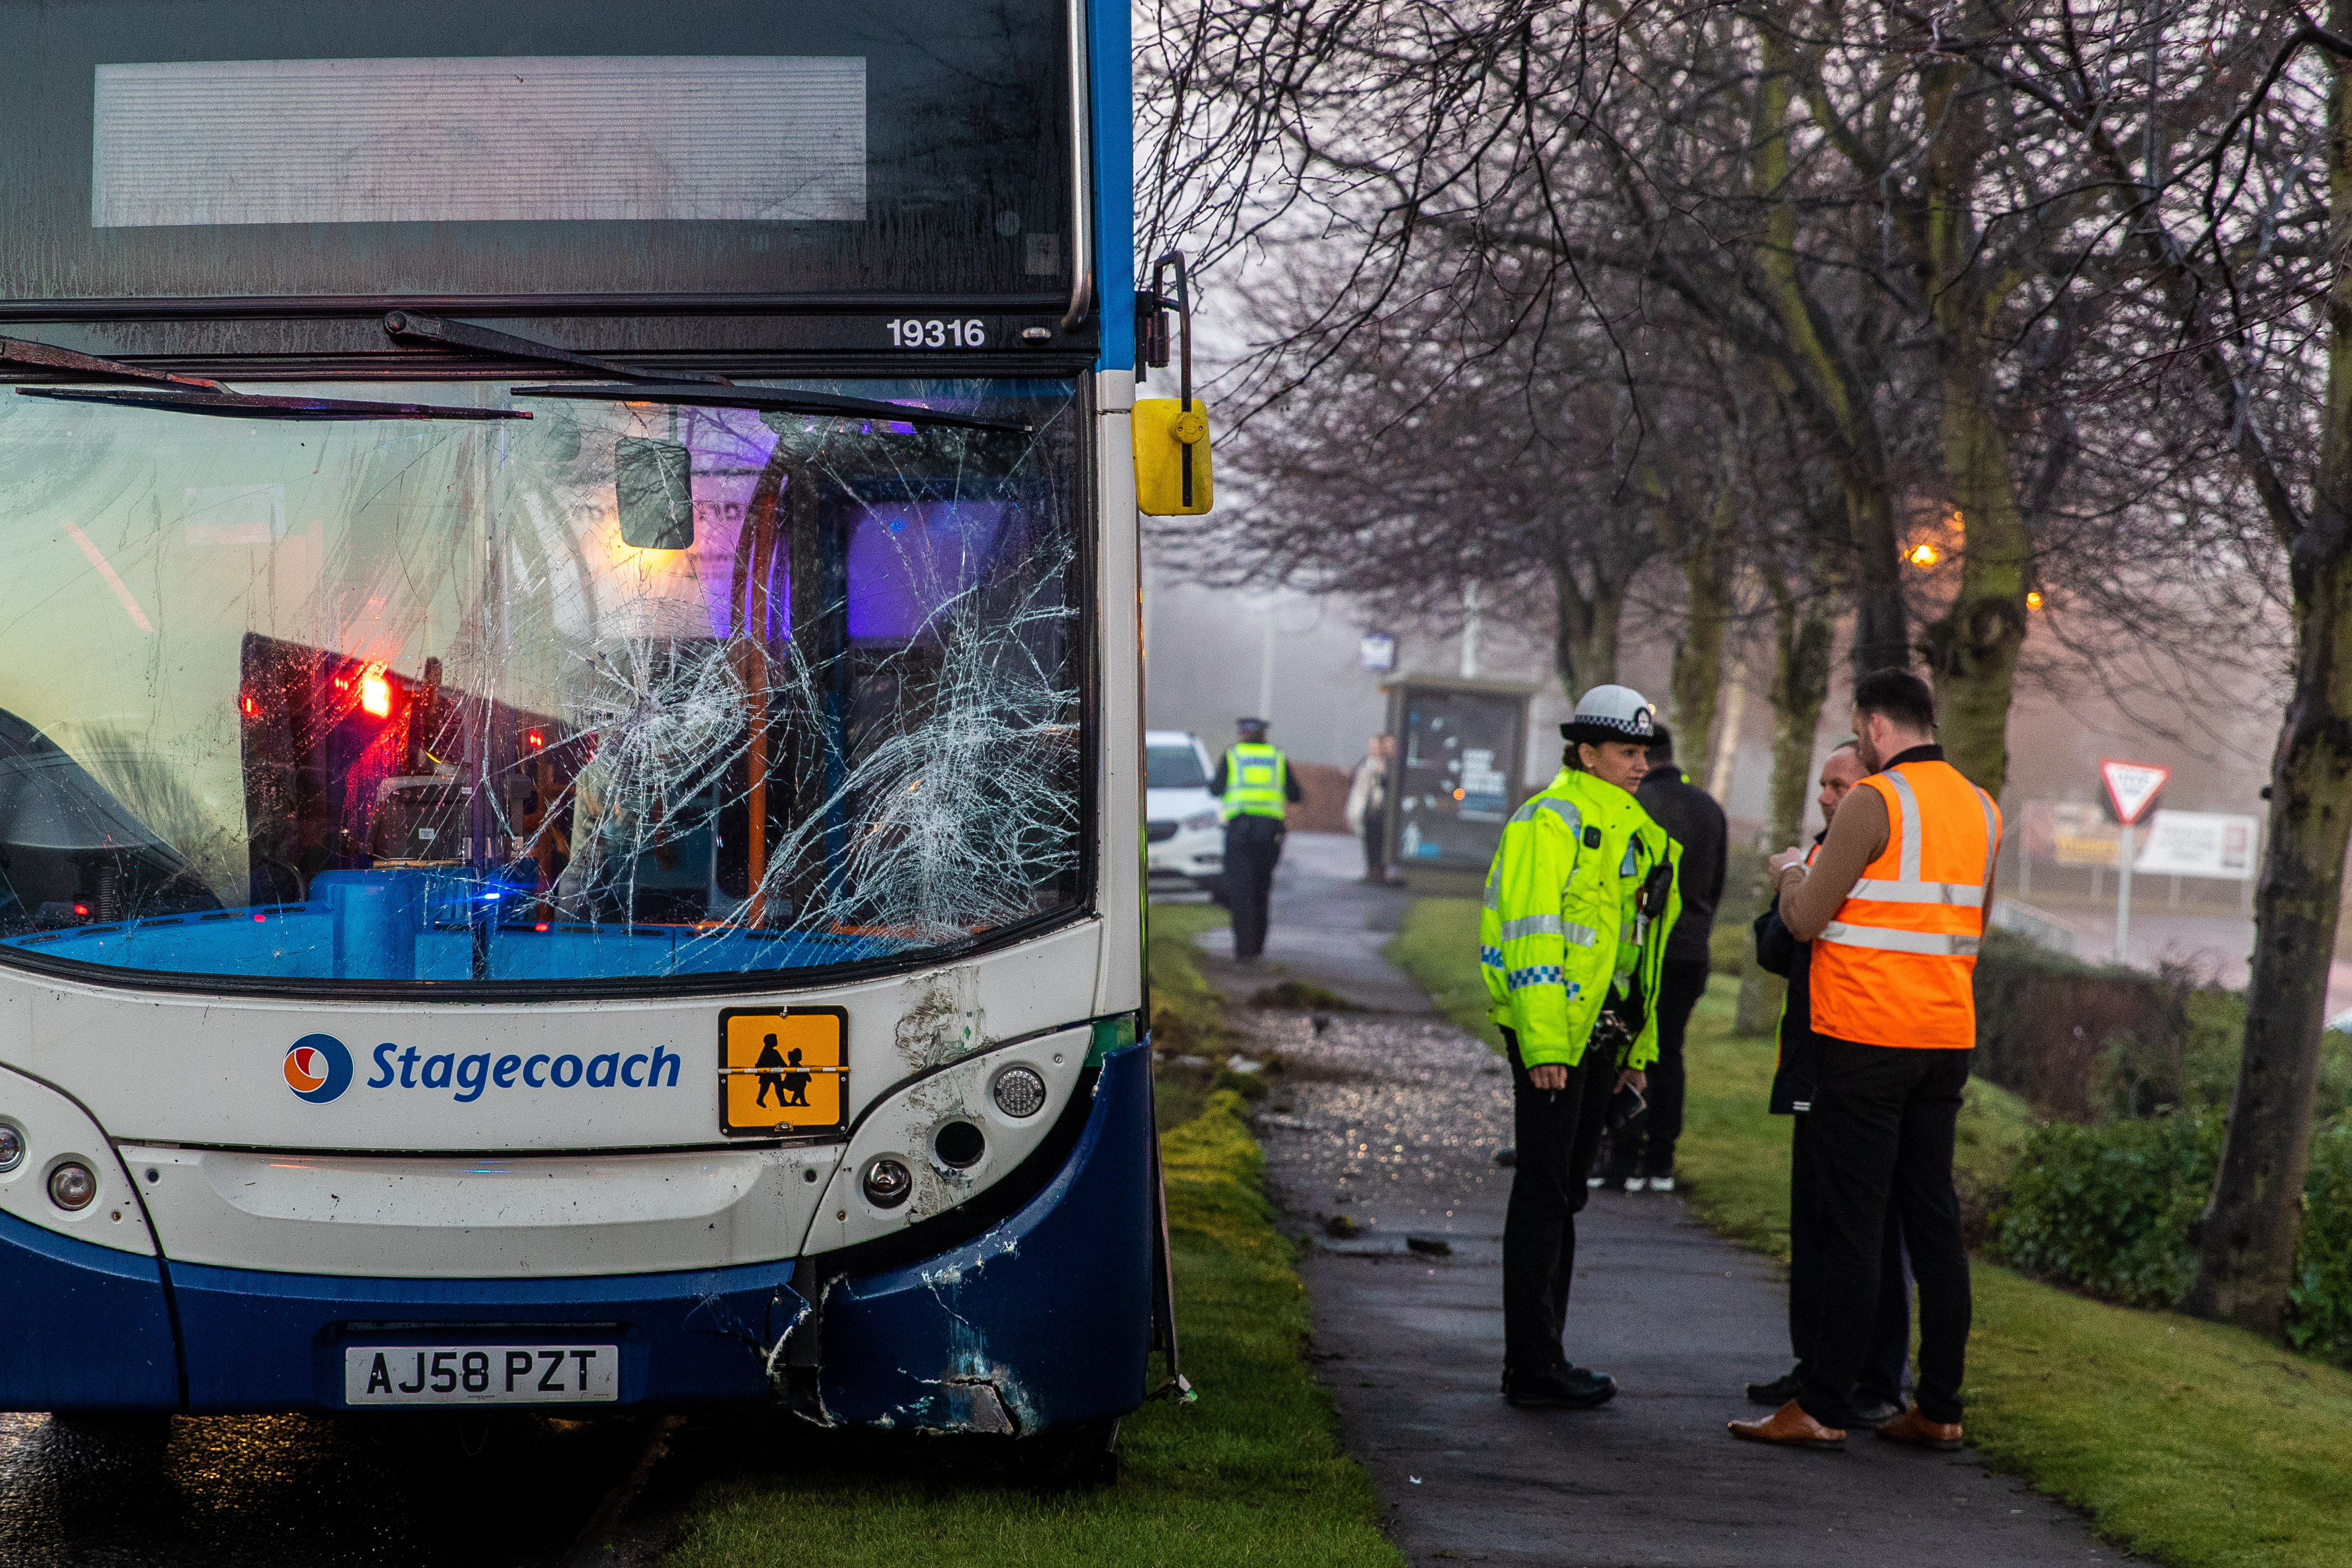 A Stagecoach bus leaves the road on Queensway East carriageway destroying road signs sustaining heavy damage.